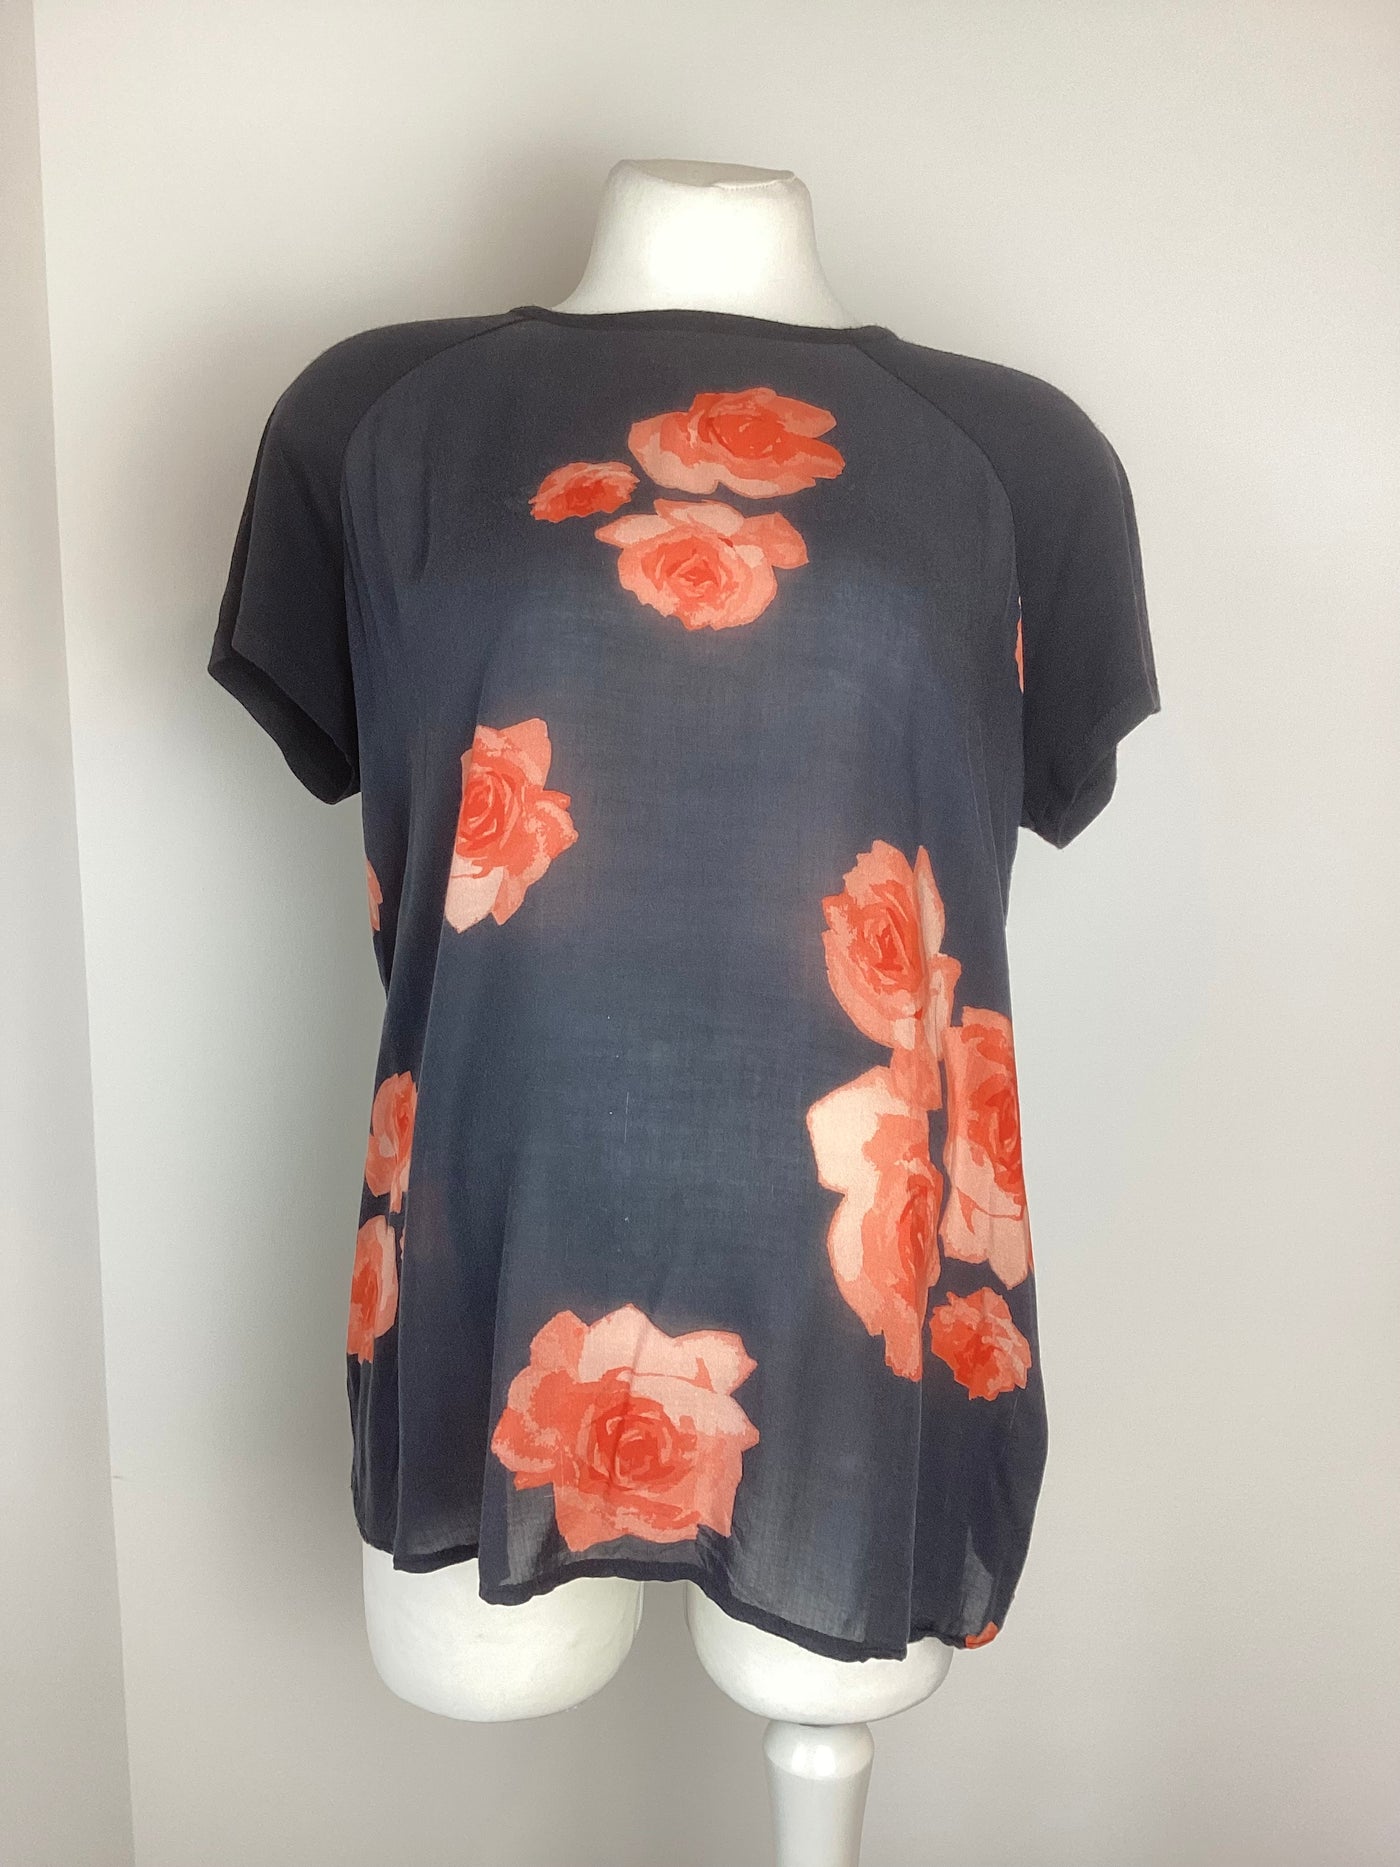 Blooming Marvellous black & orange floral short sleeved top with crossover back - Size 10